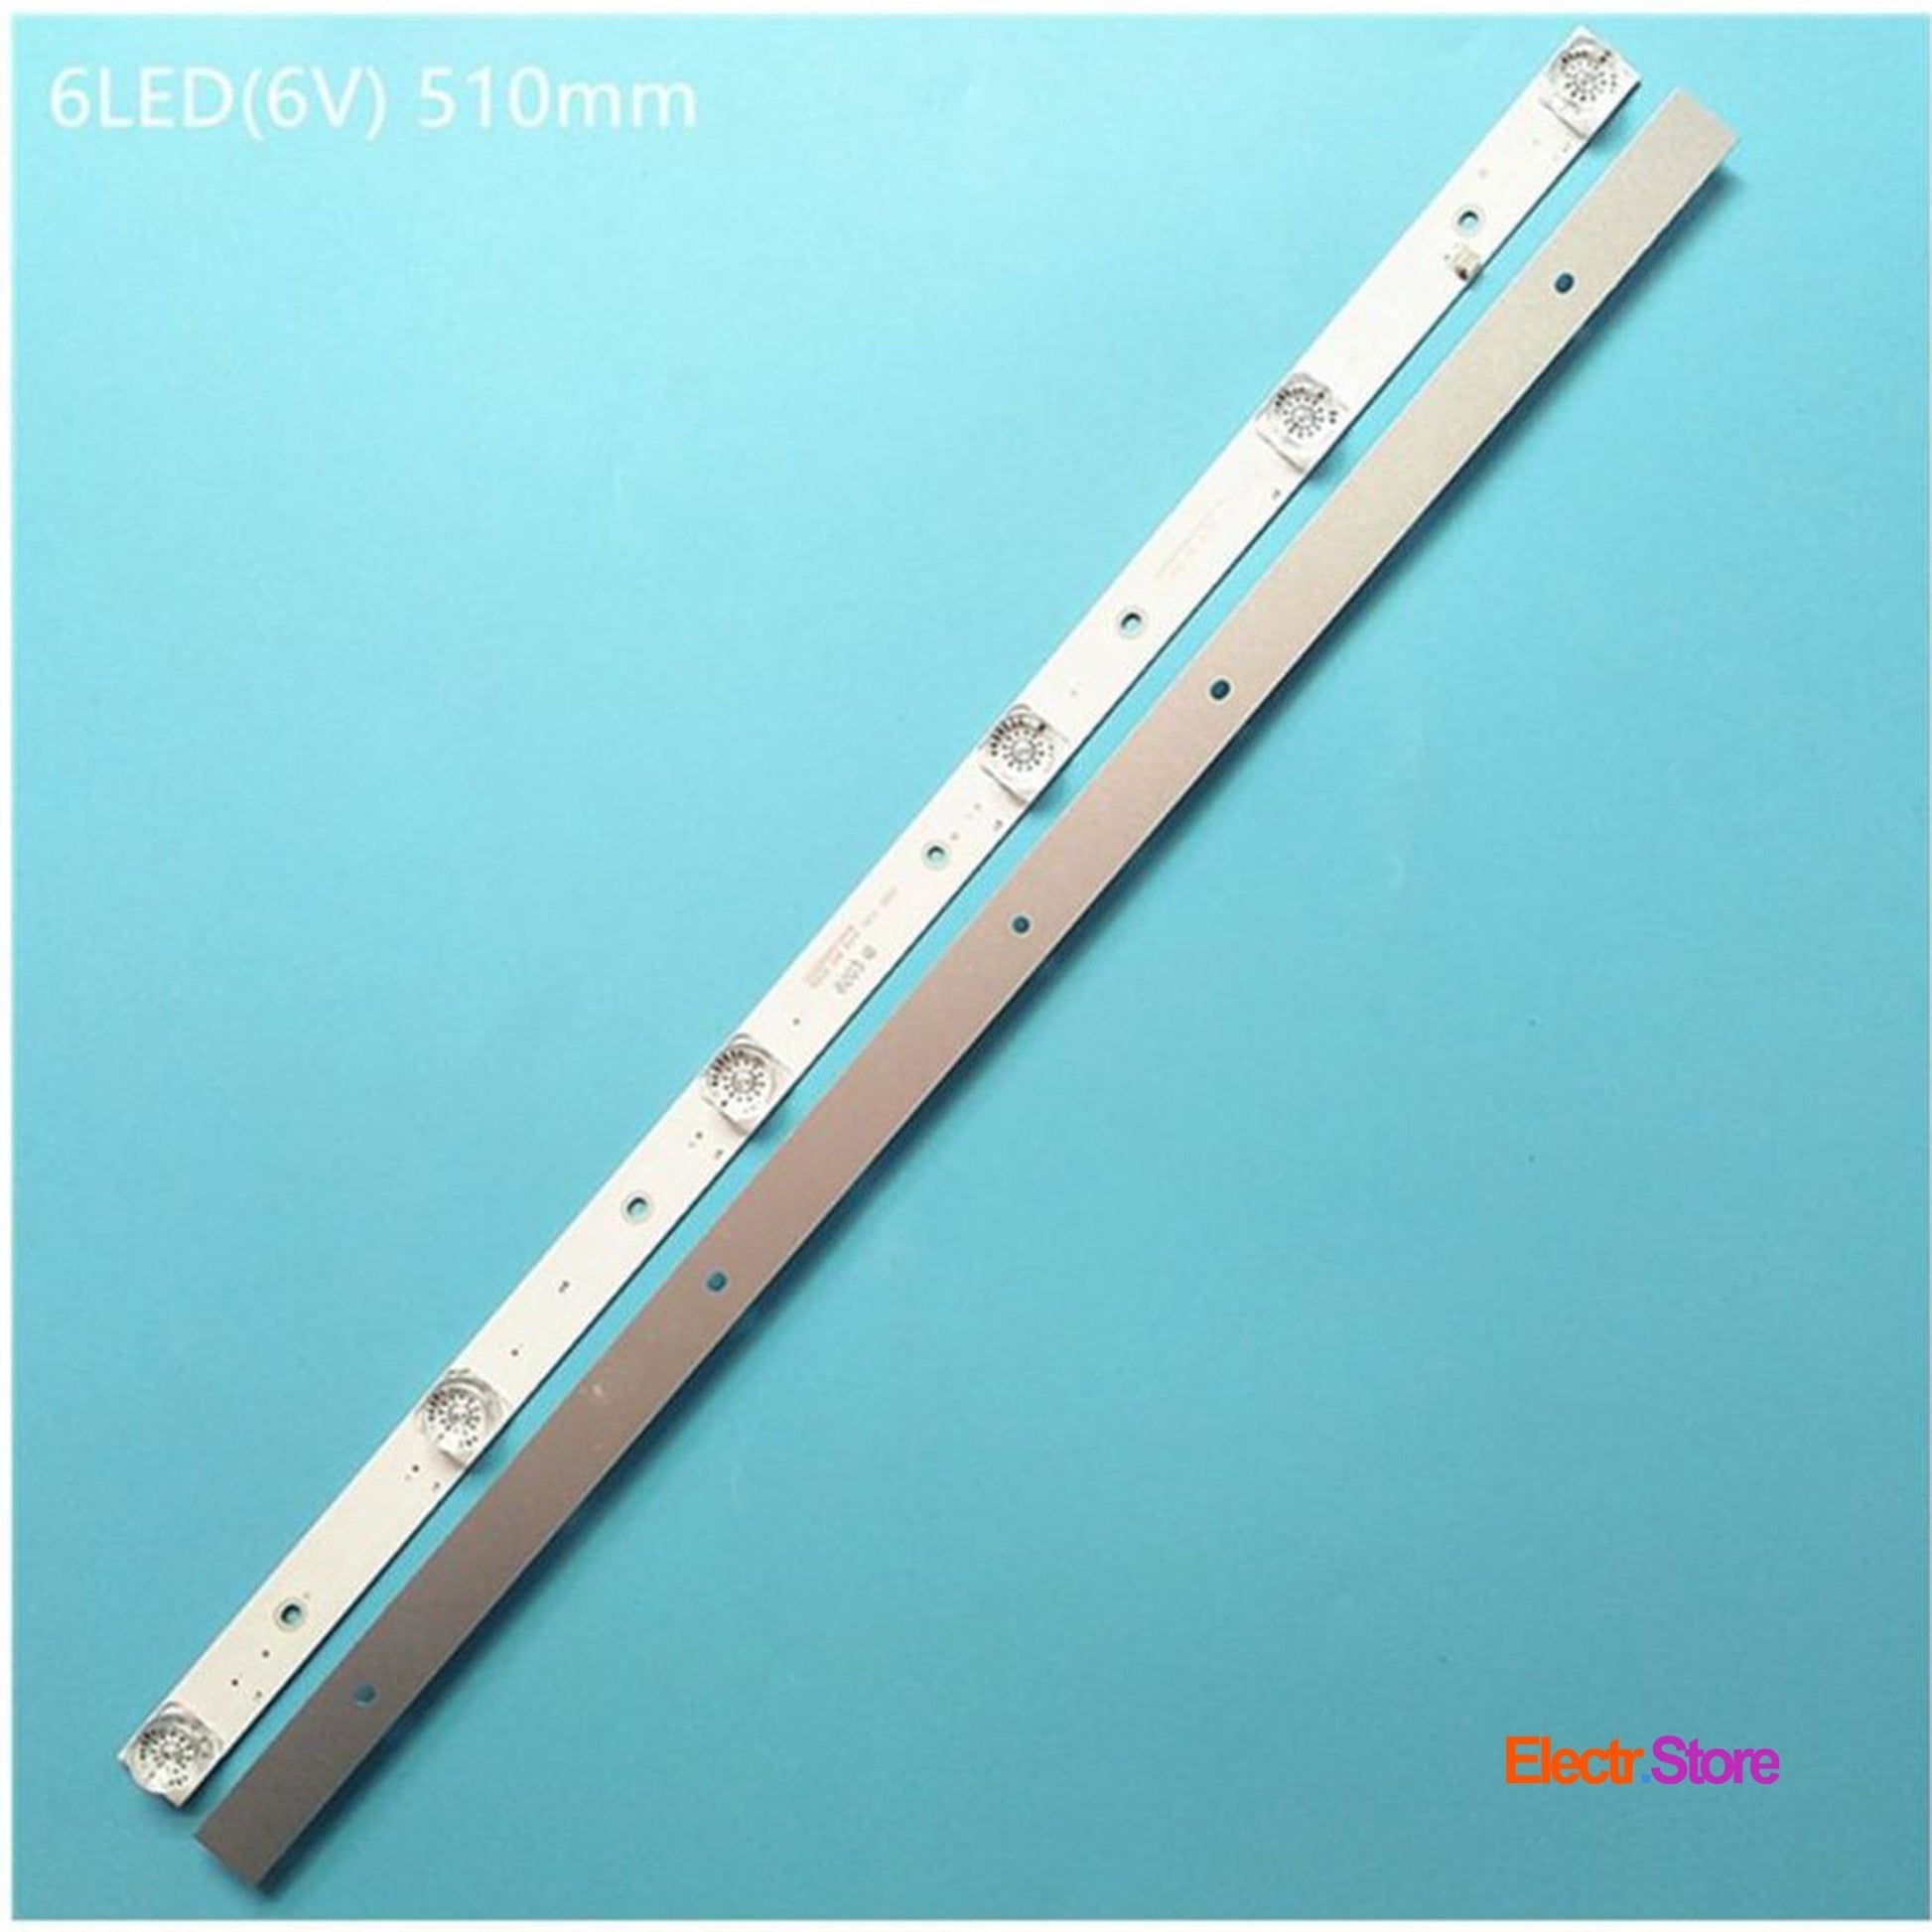 LED Backlight Strip Kits, CC02320D510V06 32E20 2x6 6S1P 1910 0D20, CC02320D510V09 32E20 2x6 6S1P 1410 0D20, MS-L2027 (2 pcs/kit), for TV 32" UNITED: 32DH58, 32DH68 32" CC02320D510V06 32e20 2x6 6s1p 1910 0d20 Dexp LED Backlights LEVEL Matrix Panda UNITED Electr.Store